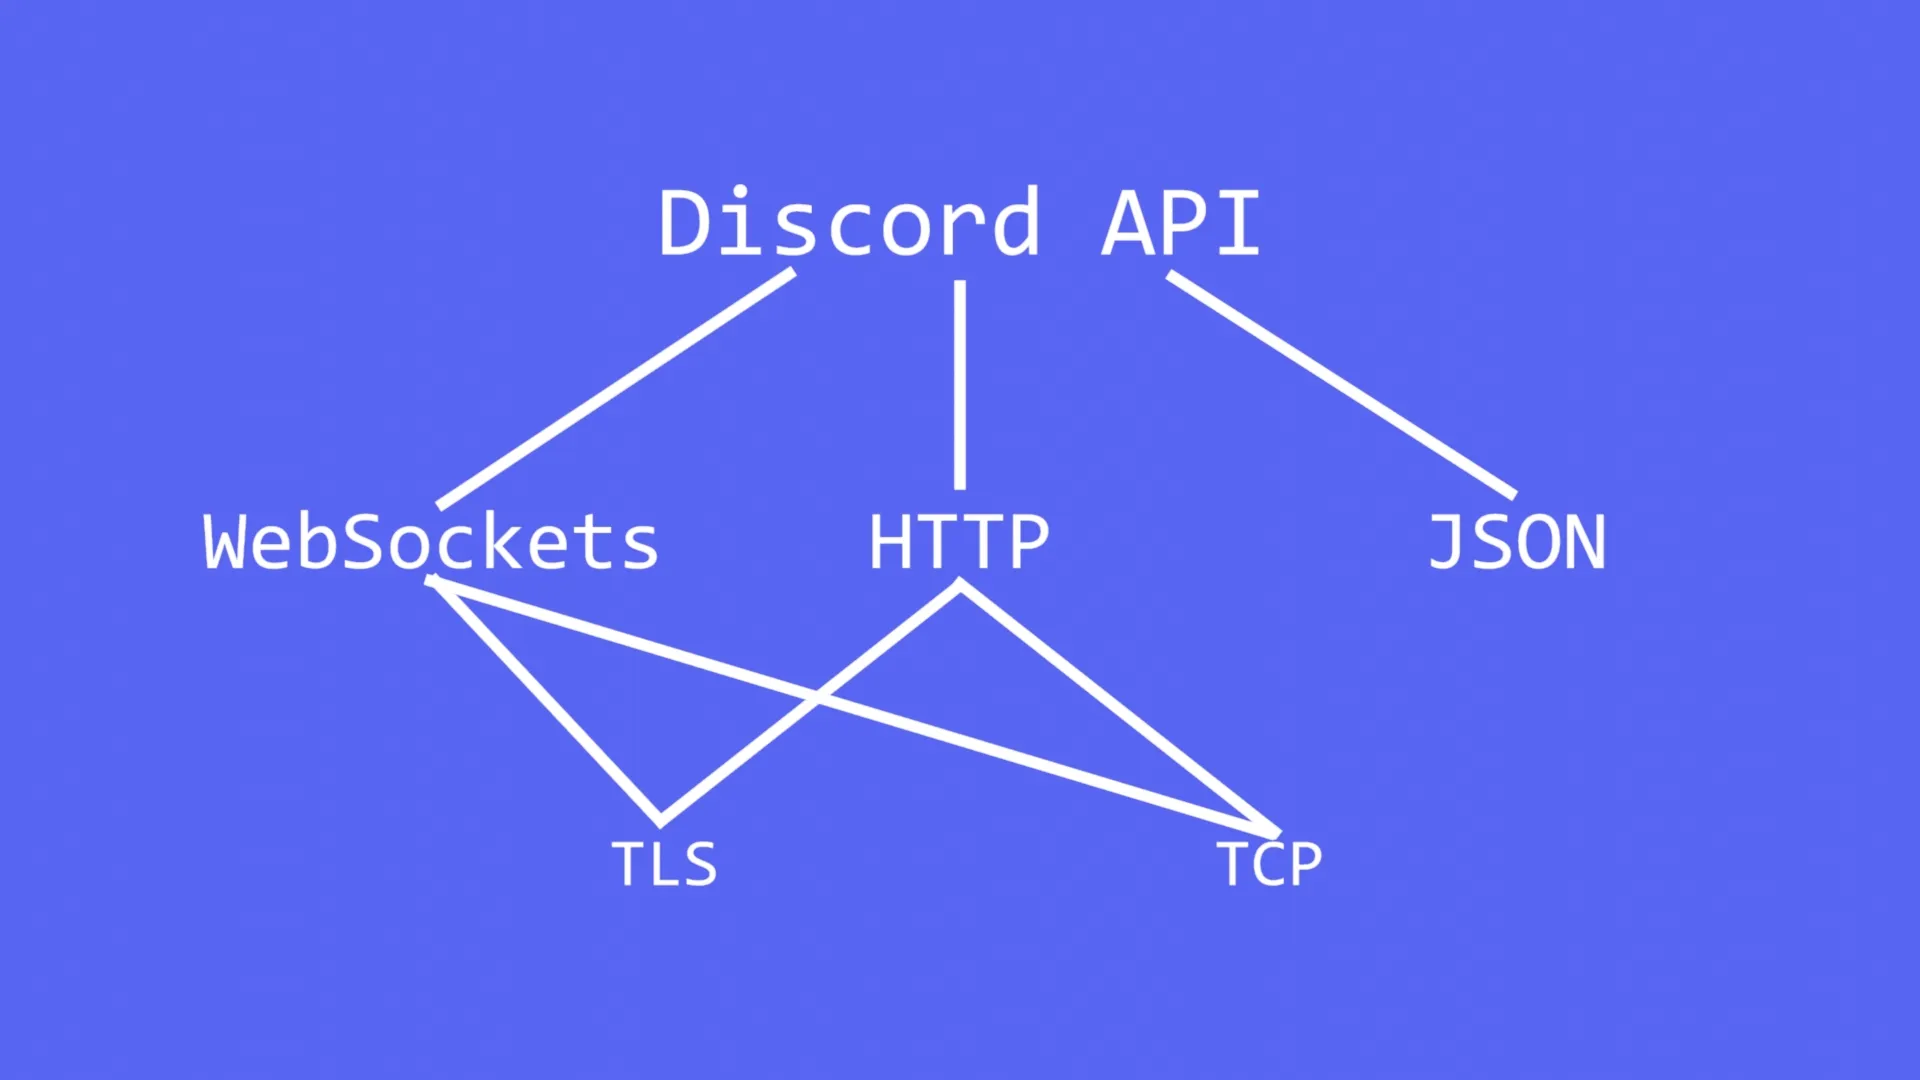 graph of protocols used for the Discord API